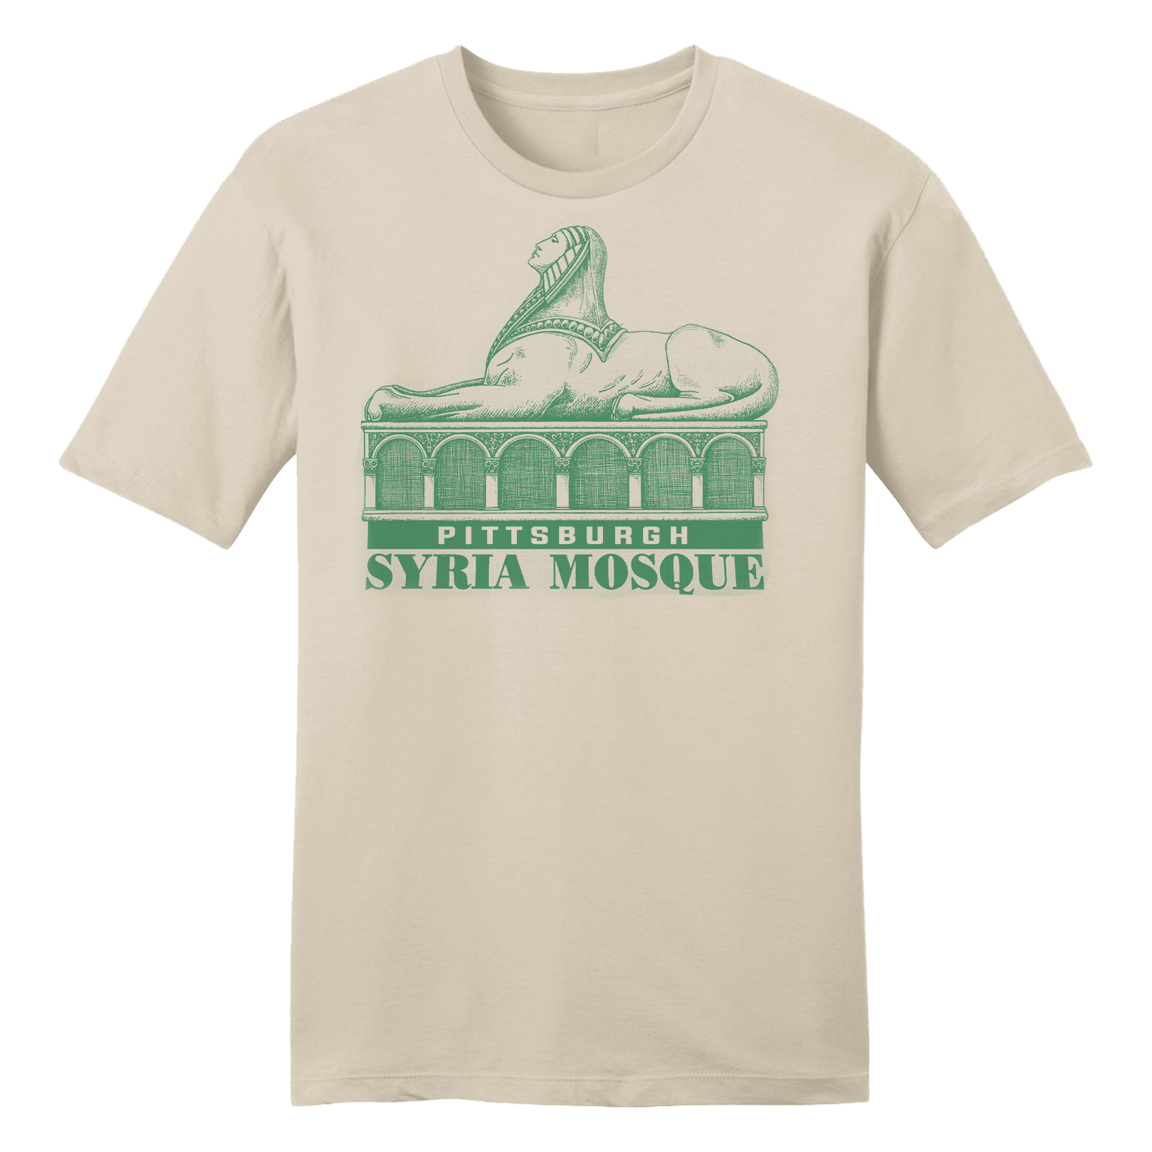 The Syria Mosque